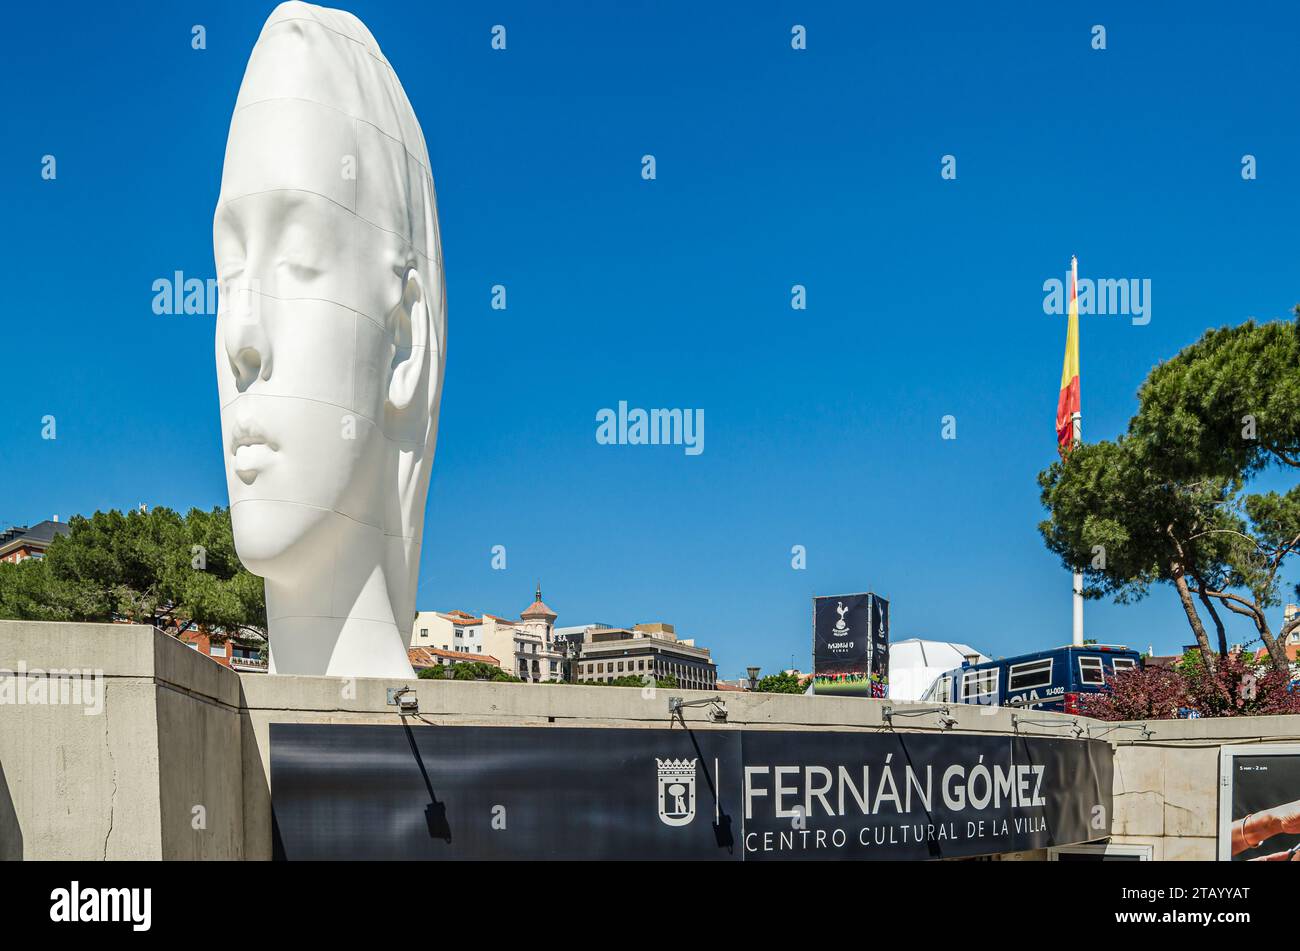 MADRID, SPAIN - JUNE 1, 2019: Sculpture 'Julia' made of polyester resin and white marble powder by the artist Jaume Plensa, located since 2018 in the Stock Photo